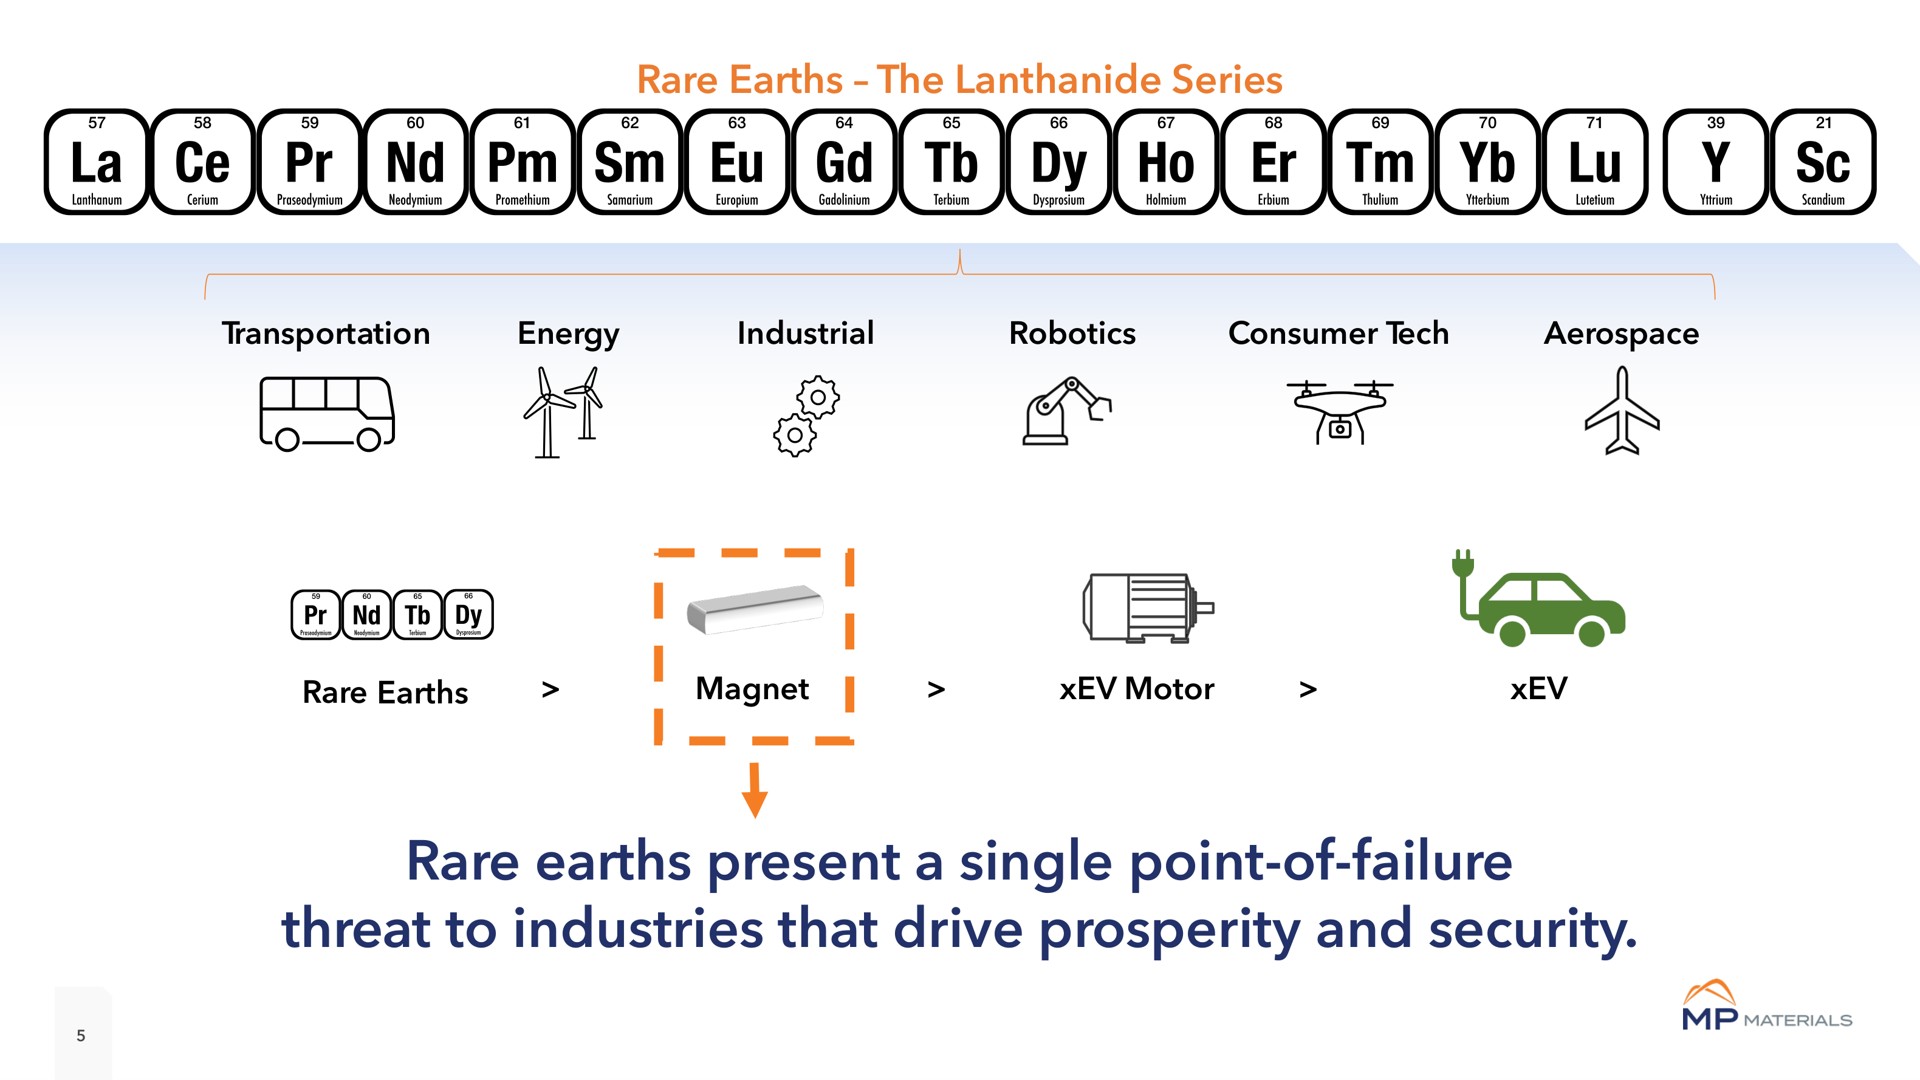 rare earths present a single point of failure threat to industries that drive prosperity and security as | MP Materials